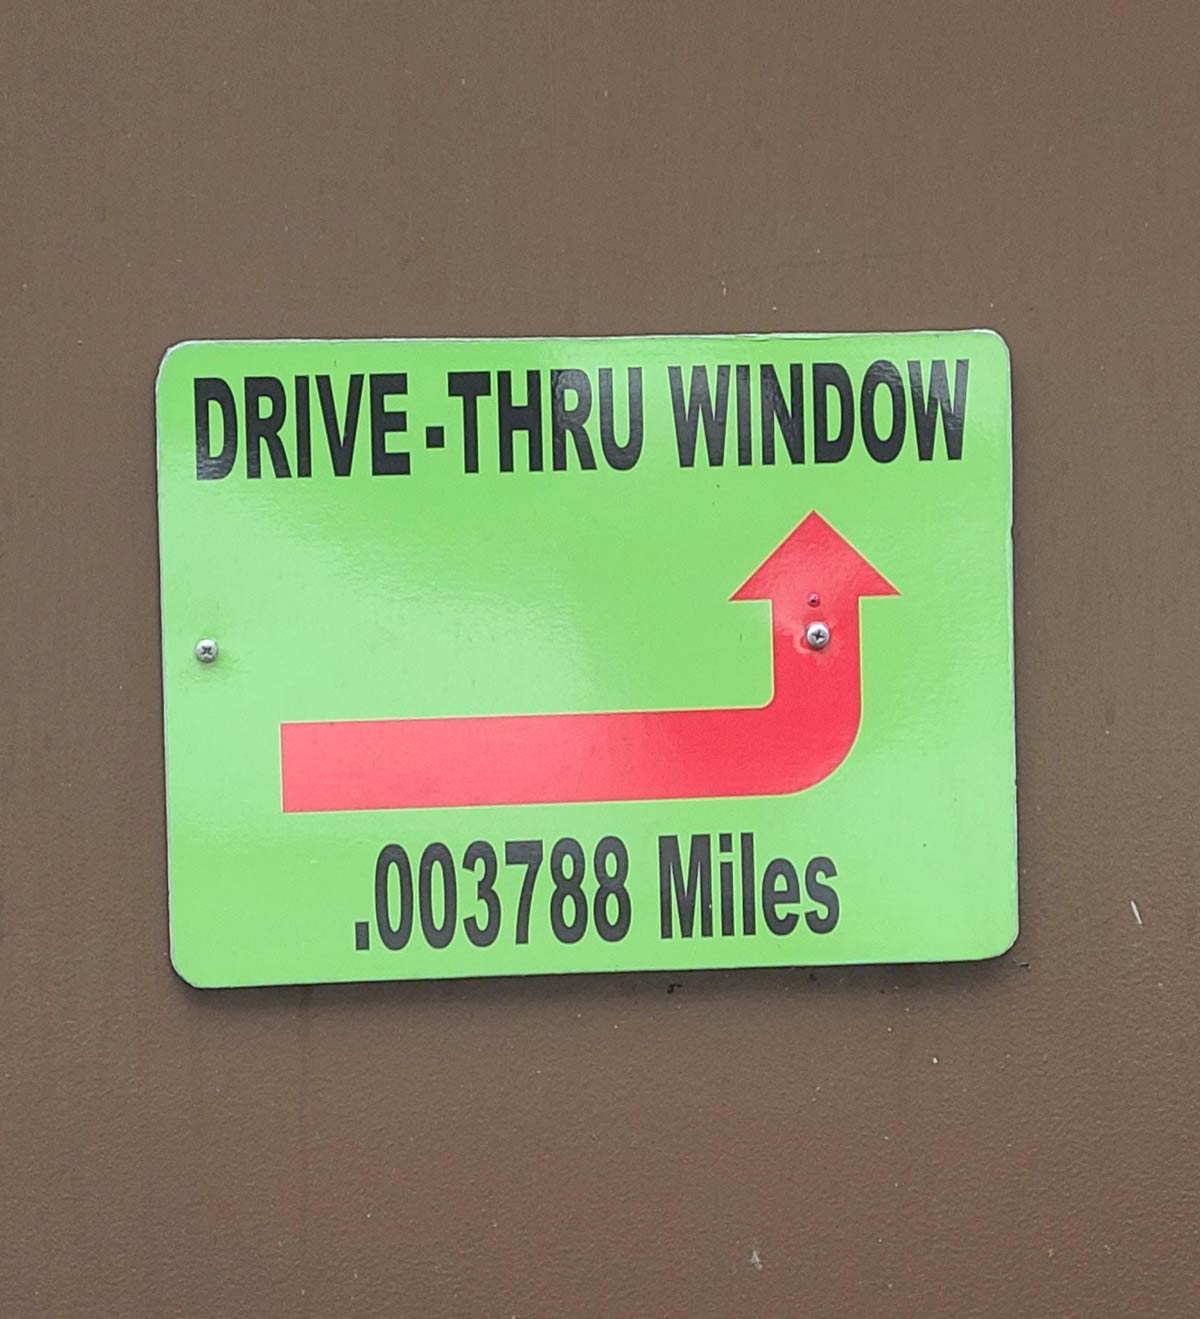 Drive thru window directions at a fast food restaurant